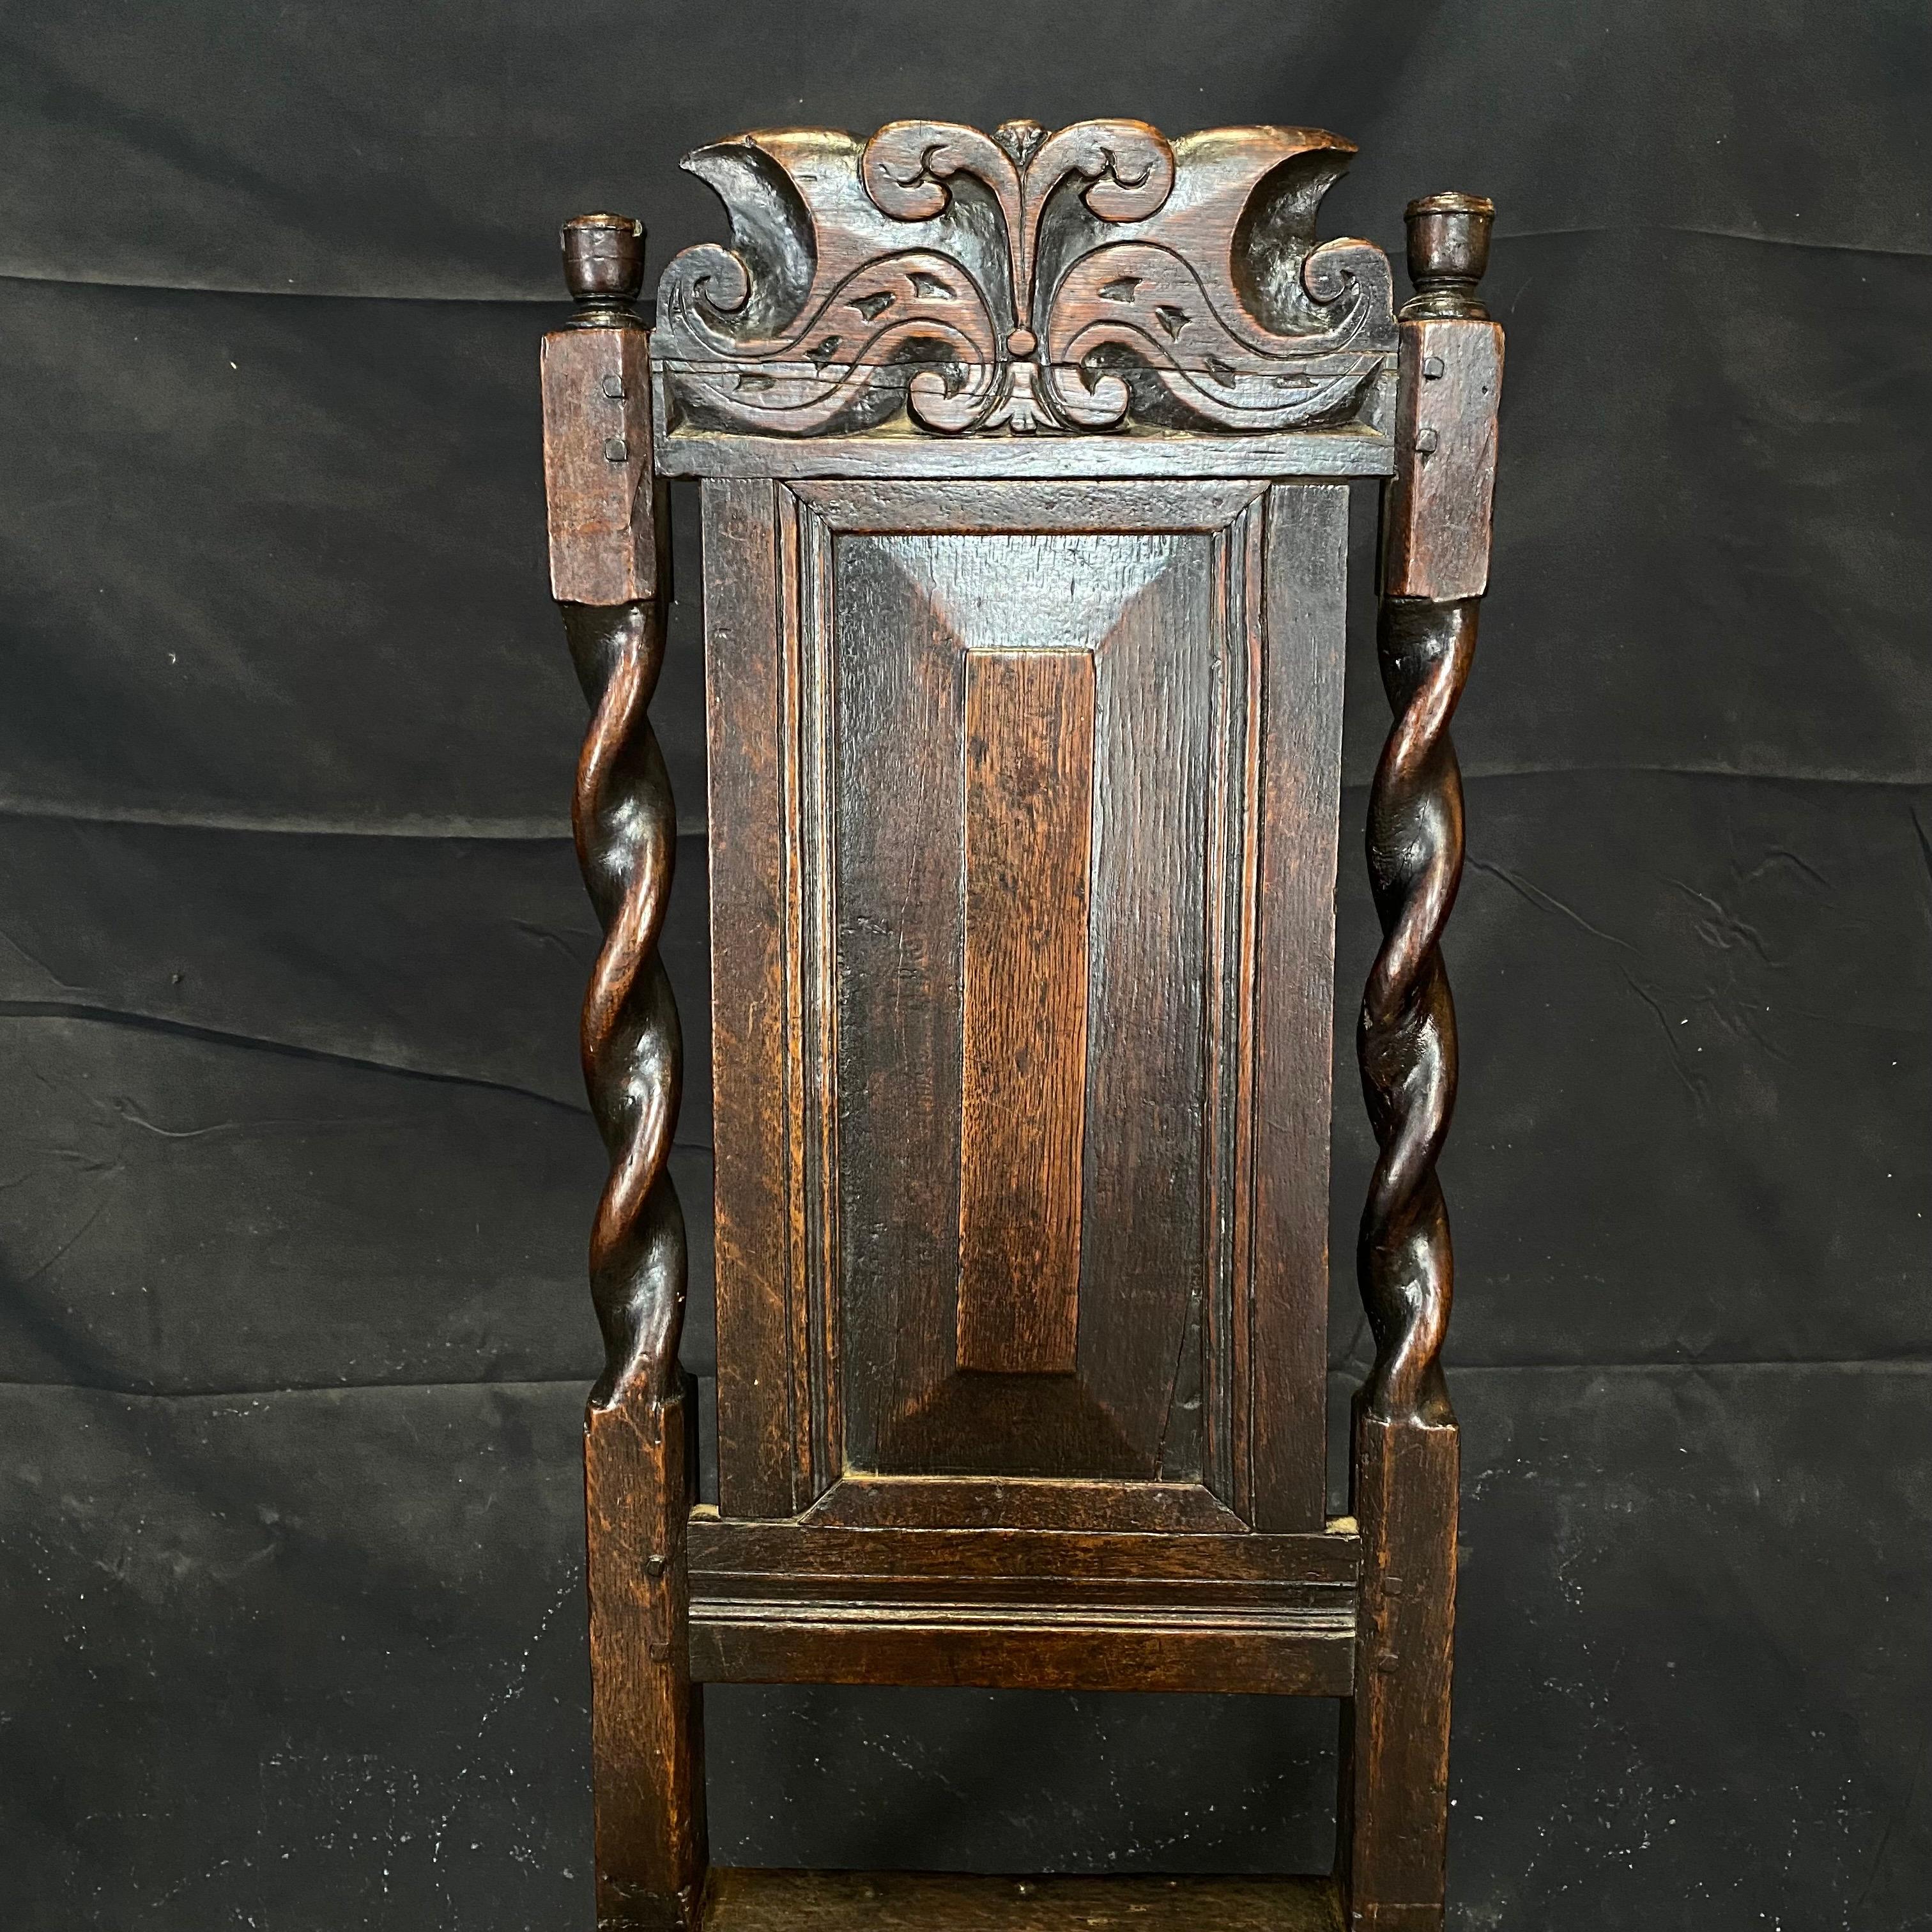 Museum quality details in the carving of this super early French chair found in the Northwest of France. This chair would have been one of only a few if any other, chairs in a wealthy household . Would be lovely as a desk or side chair, or as